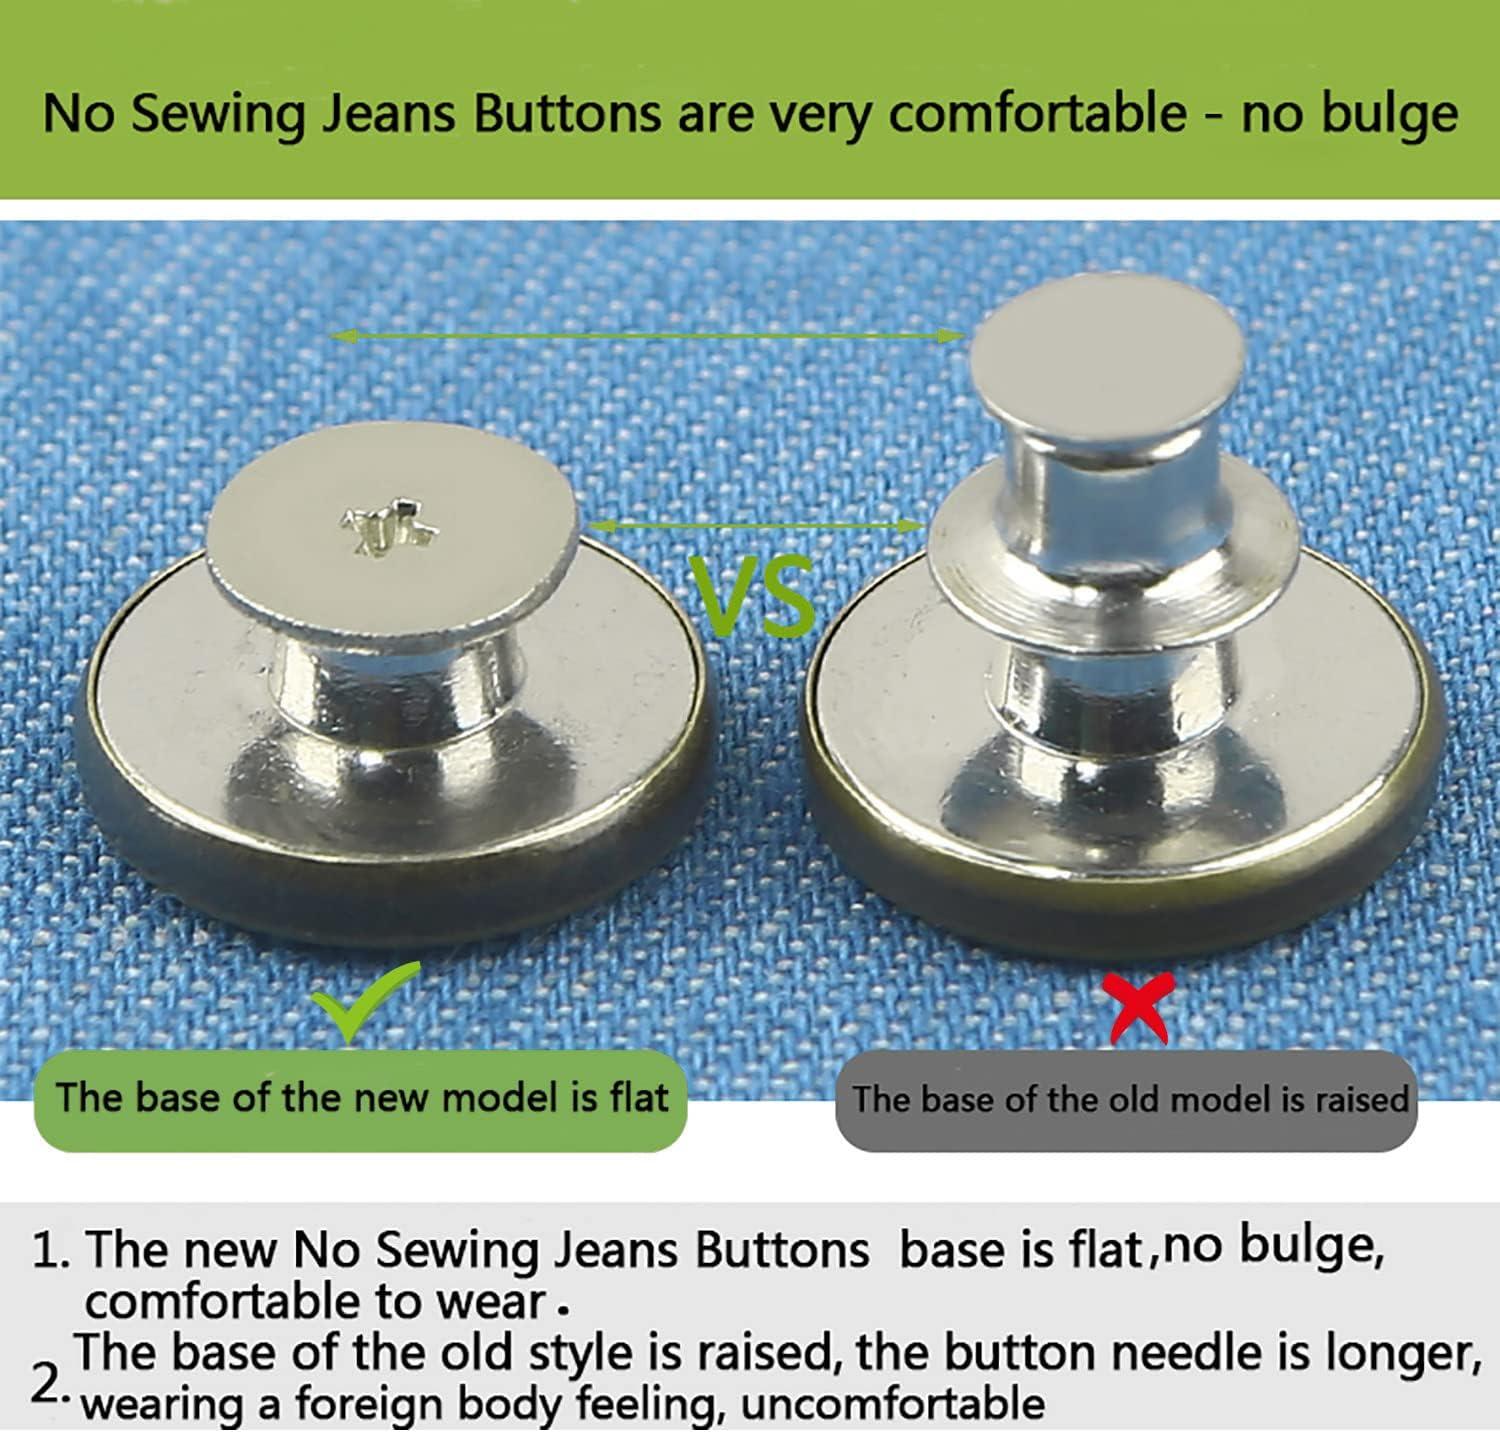 ZHIYONZEE 12 Sets Adjustable Buttons for Jeans, 20mm No Sew Instant Metal Buttons, Removable Jean Buttons Replacement Repair Kit with Threads Rivets